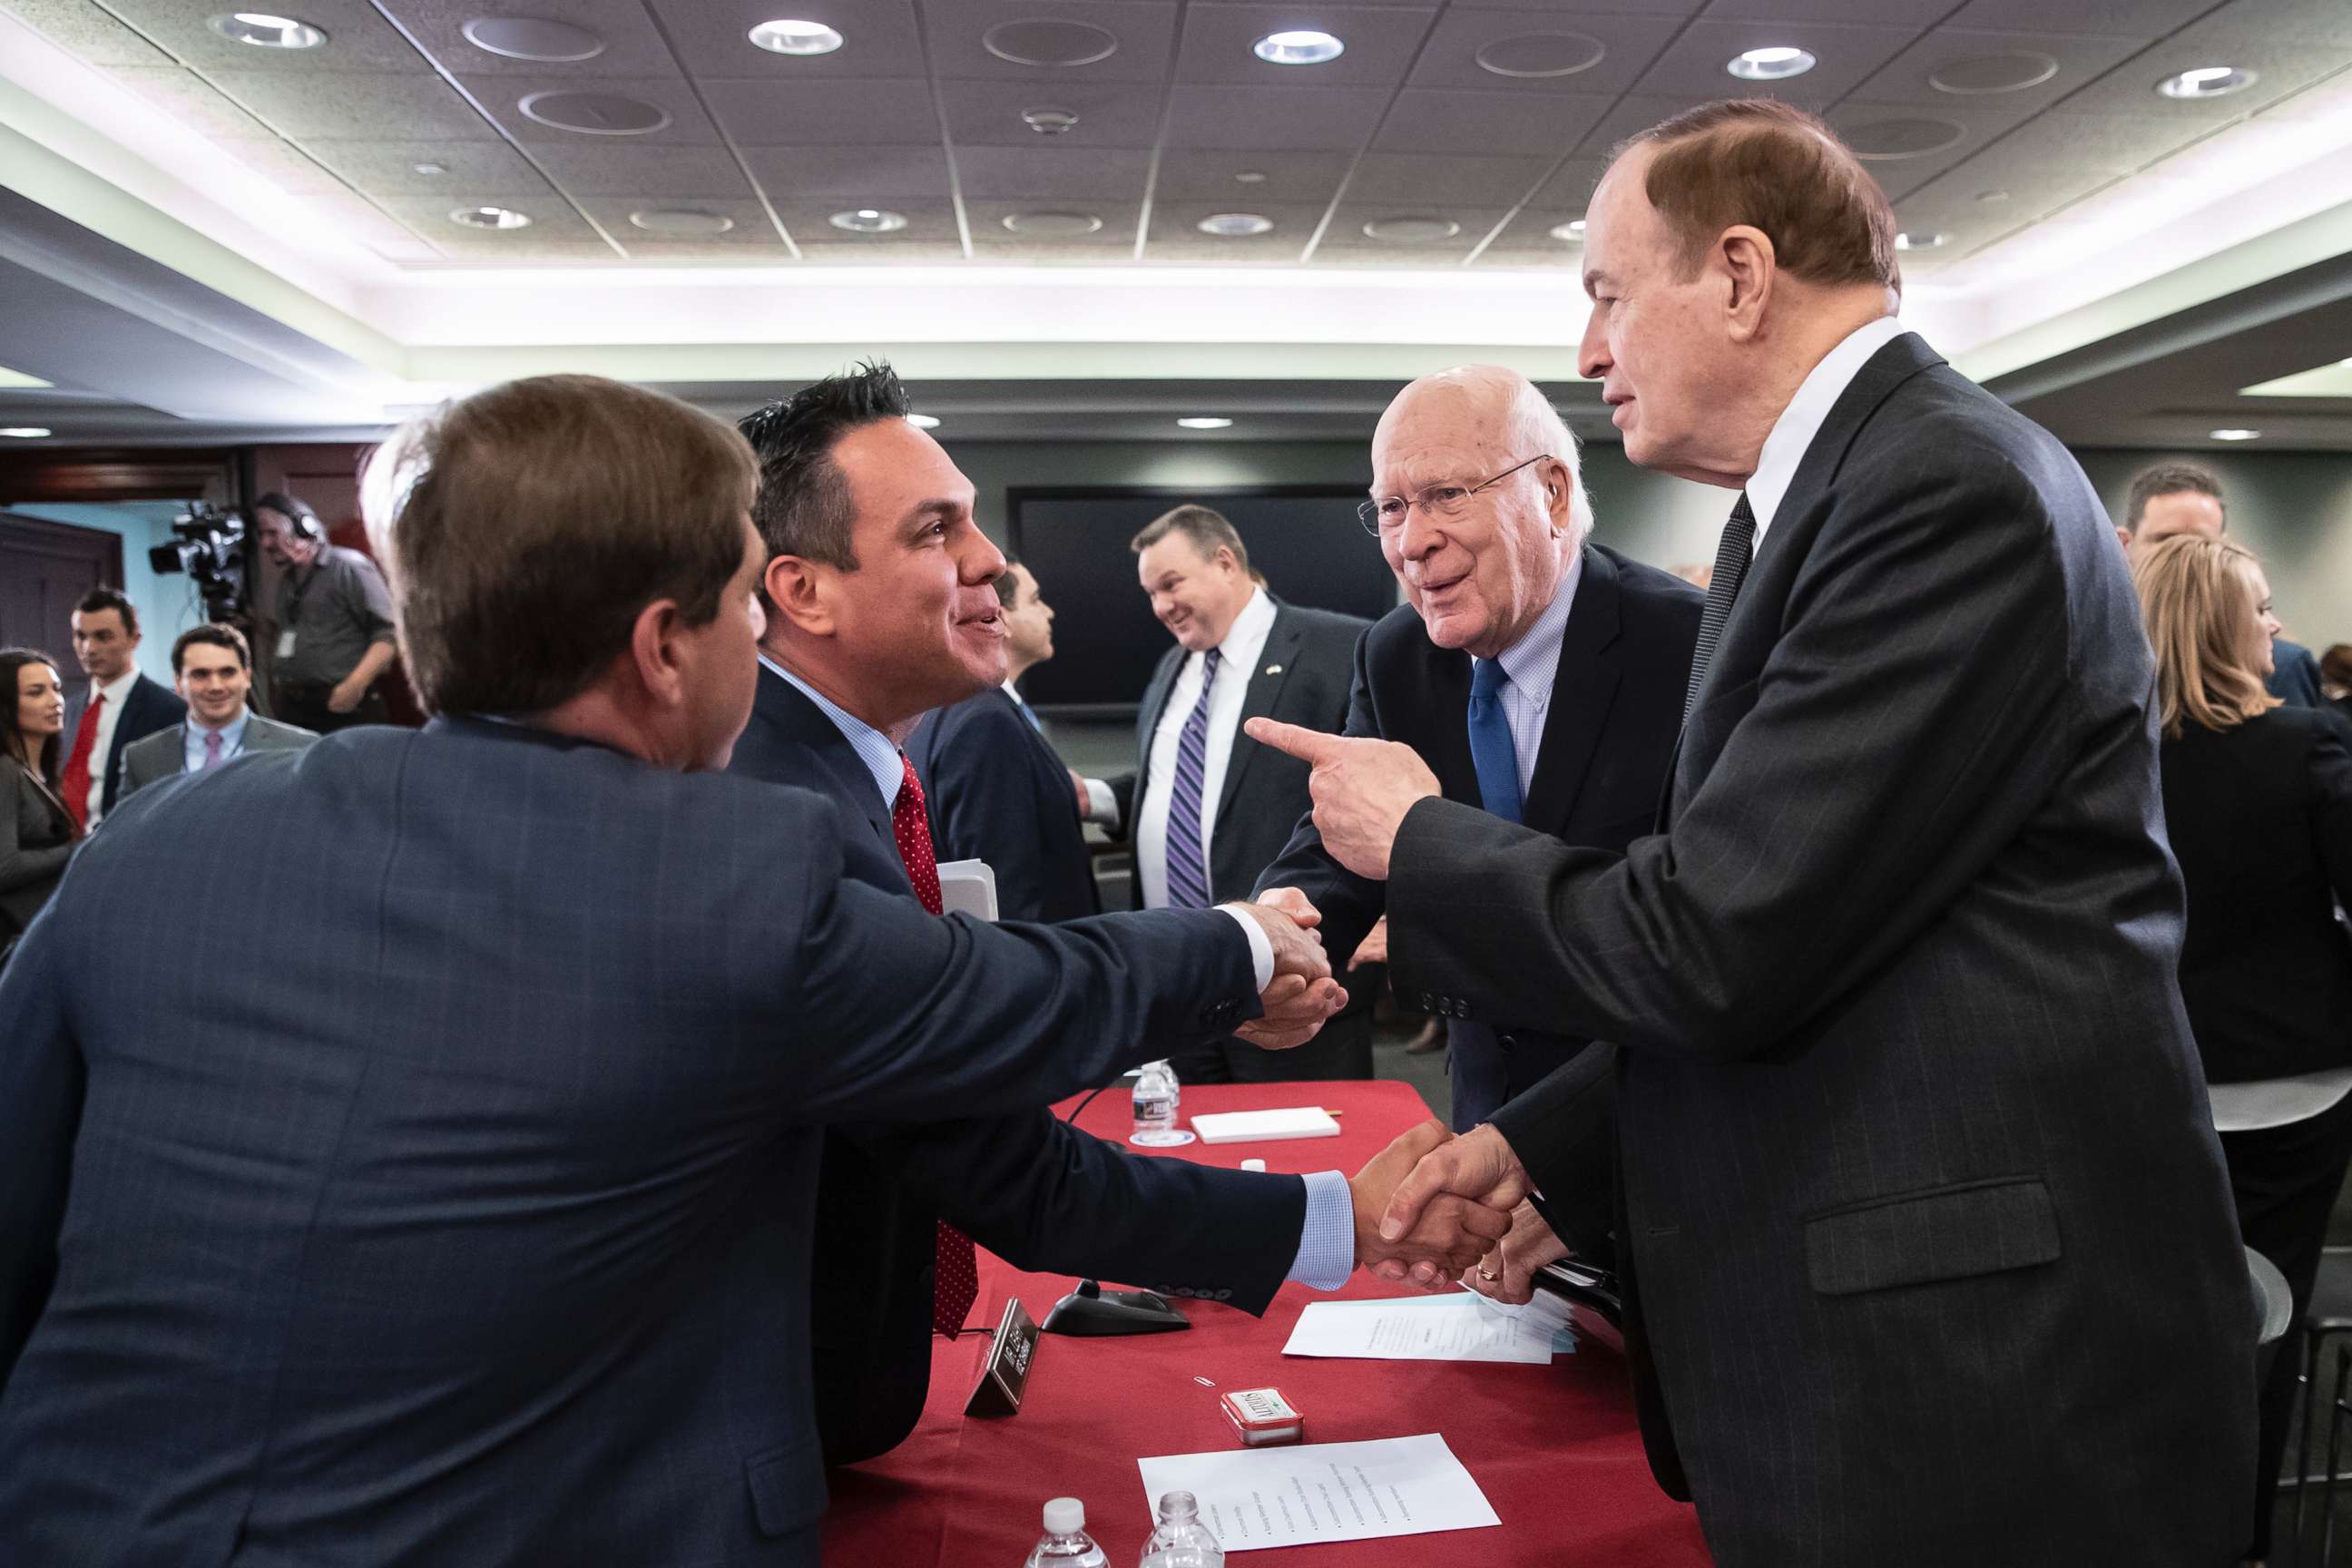 PHOTO: Politicians greet each other as the bipartisan group of House and Senate bargainers finished their first meeting to craft a border security compromise in hope of avoiding another government shutdown, at the Capitol, Jan. 30, 2019. 